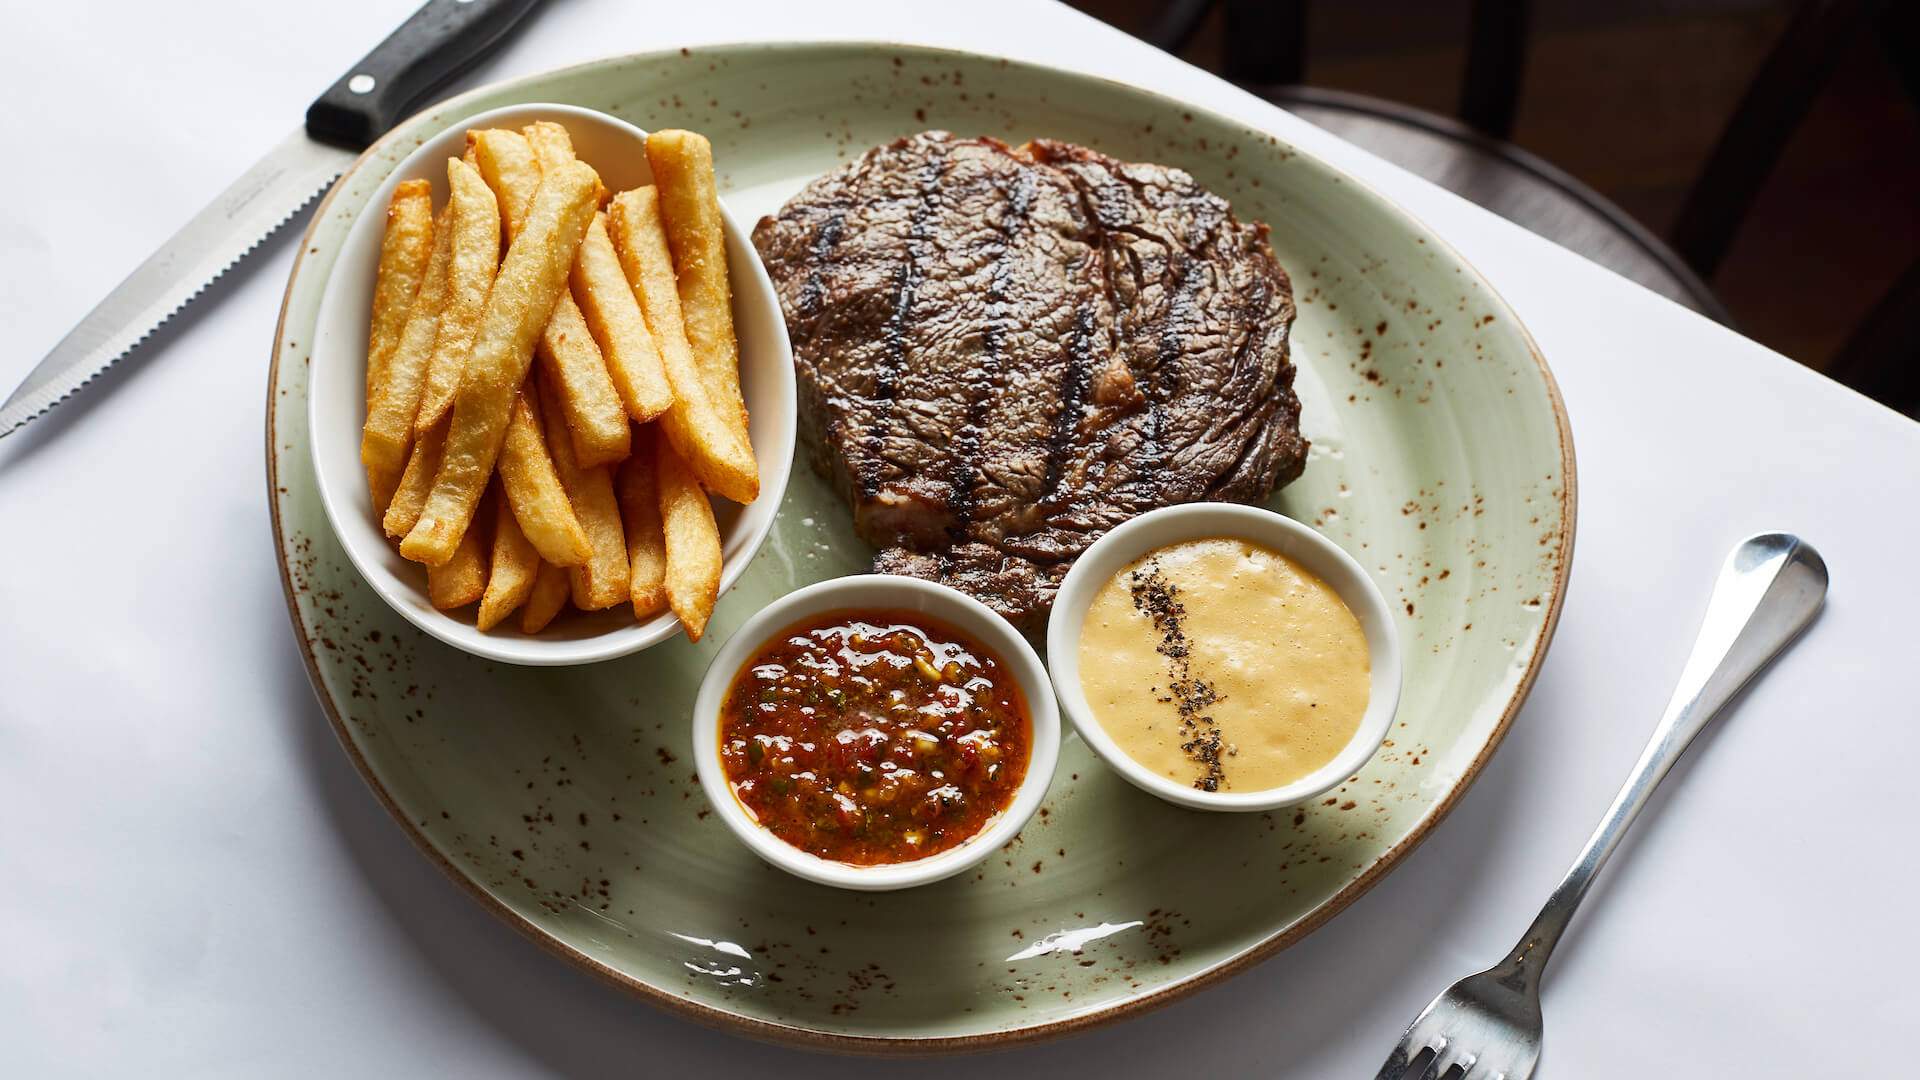 Steak and fries at L'hotel Gitan - home to some of the best steak in Melbourne